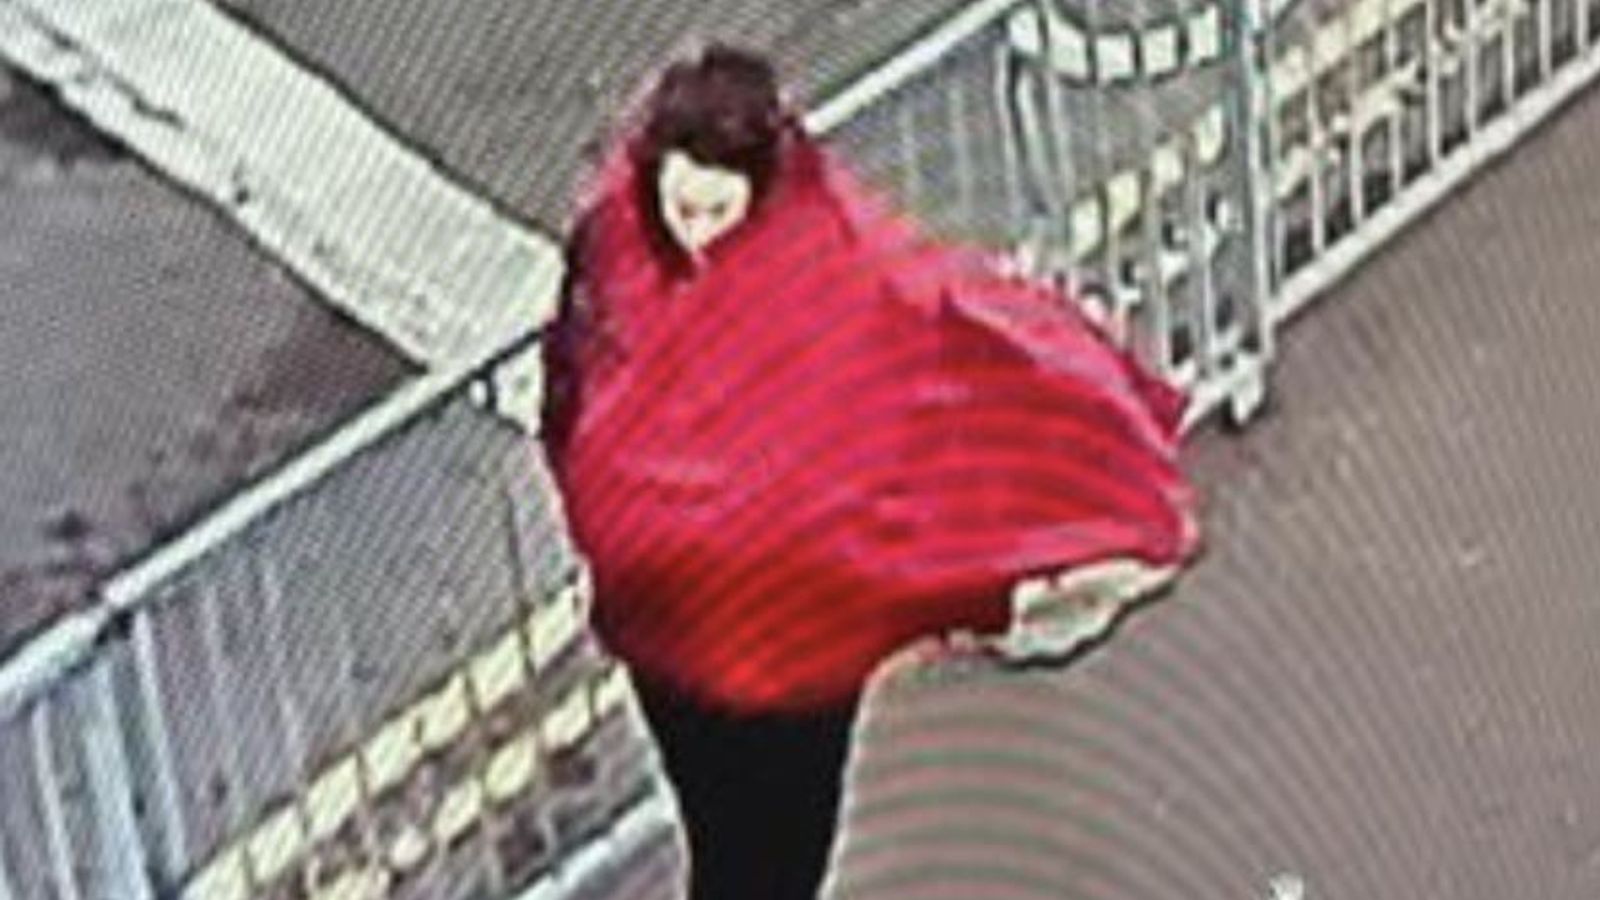 Police searching for mother missing with baby and father release CCTV image thought to show her in Harwich | UK News